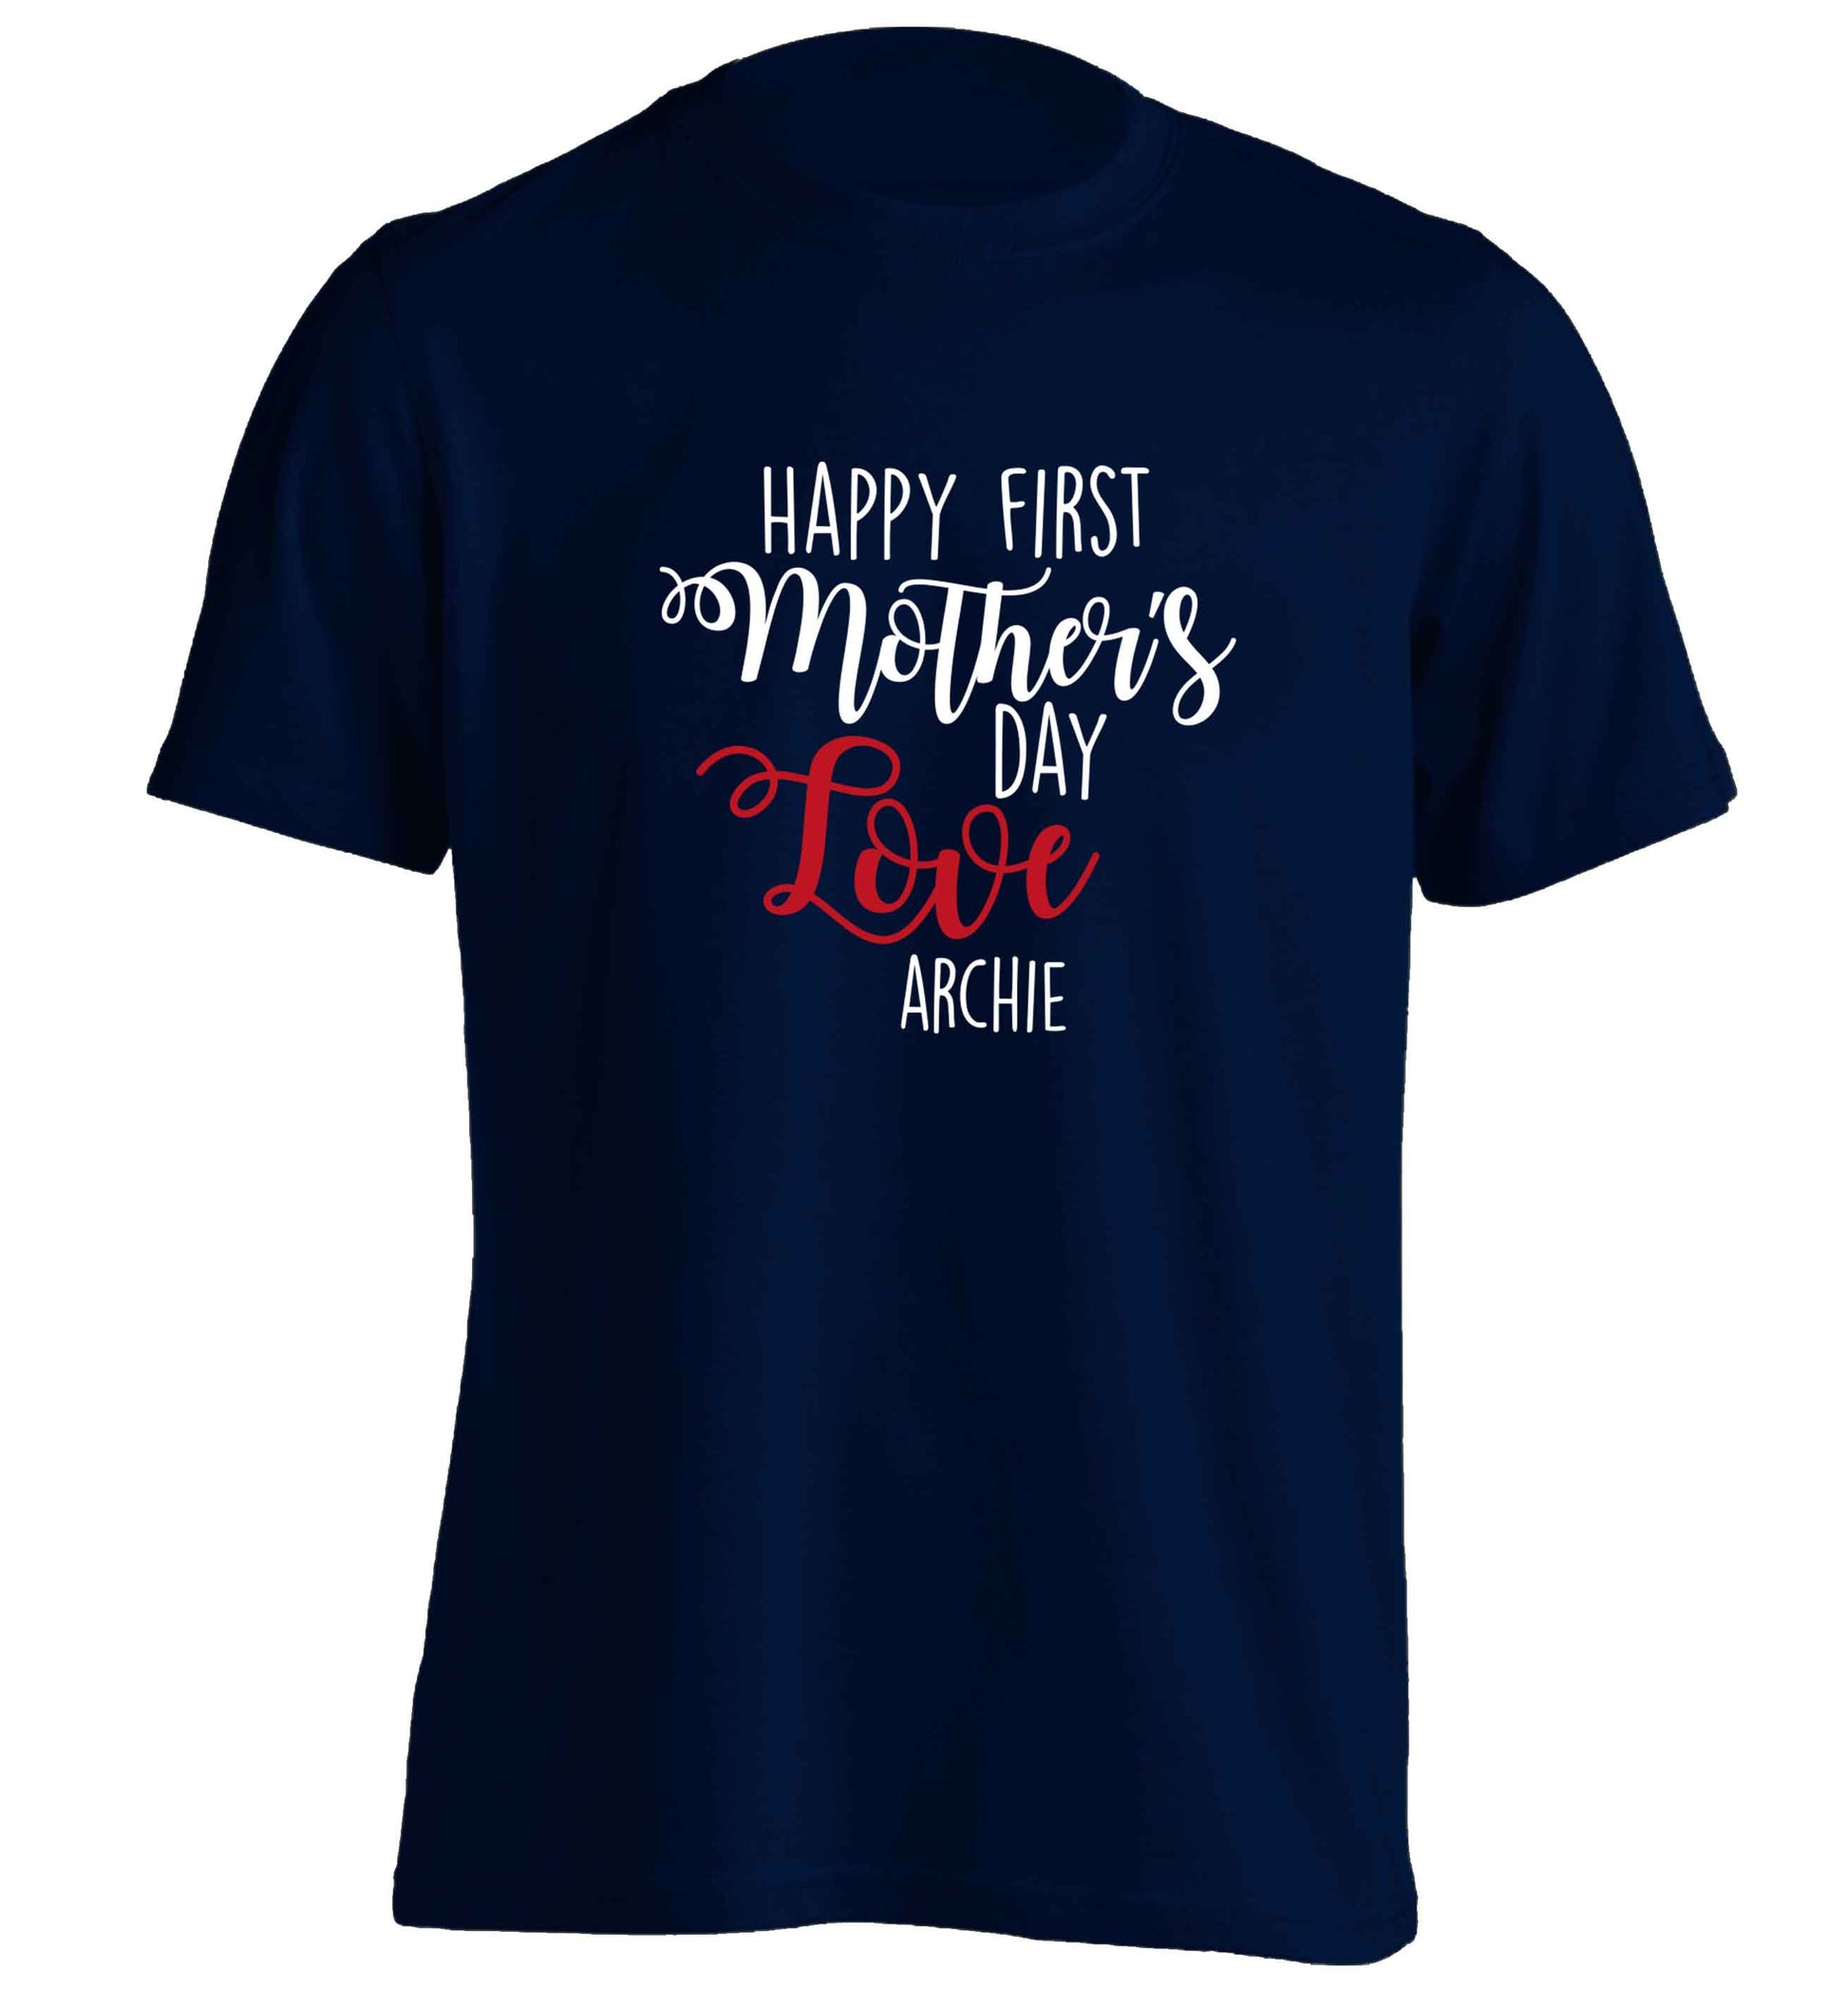 Mummy's first mother's day! adults unisex navy Tshirt 2XL